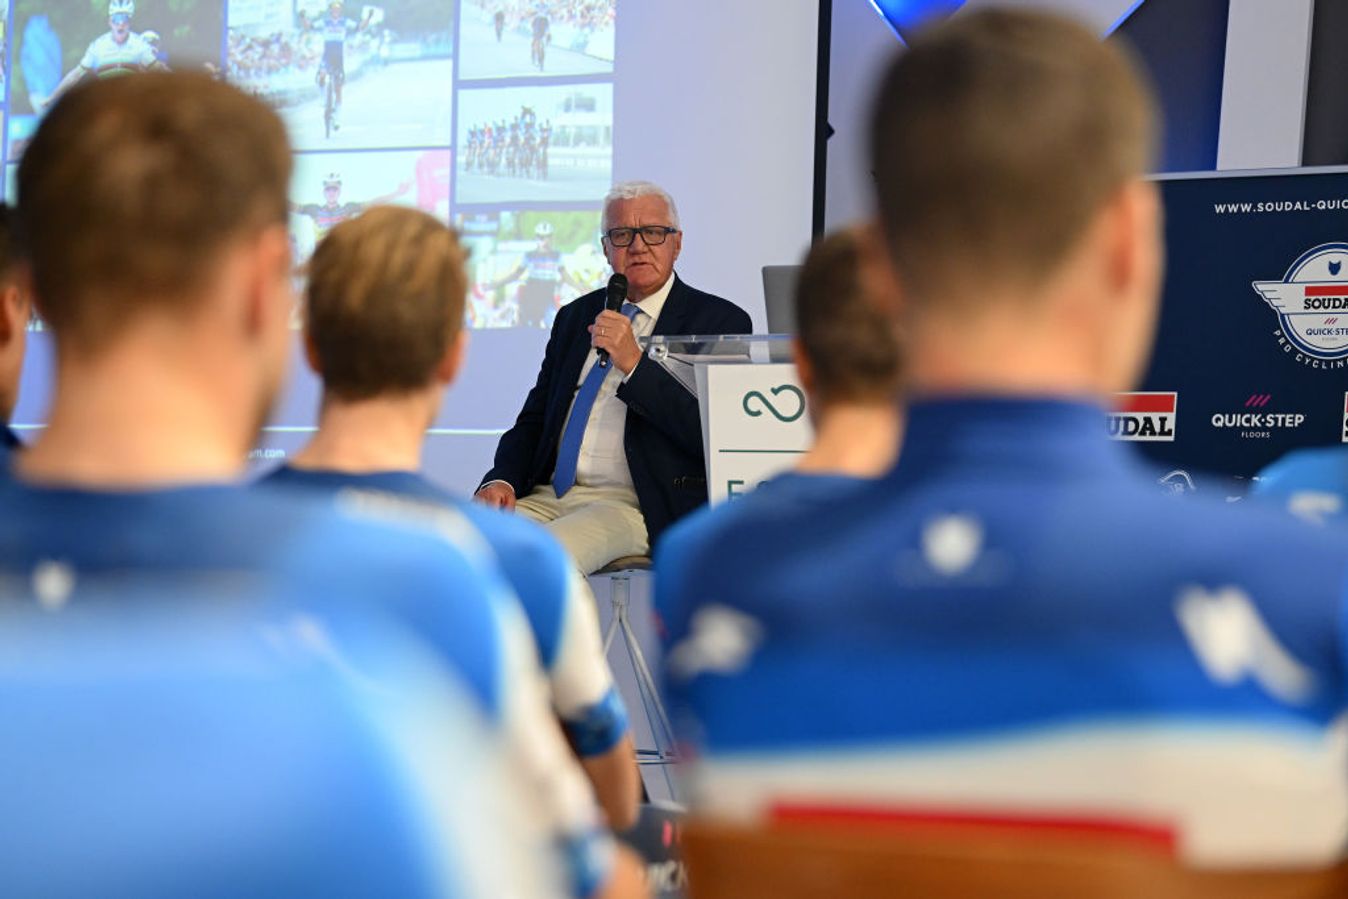 Patrick Lefevere has been criticised for comments made towards his riders